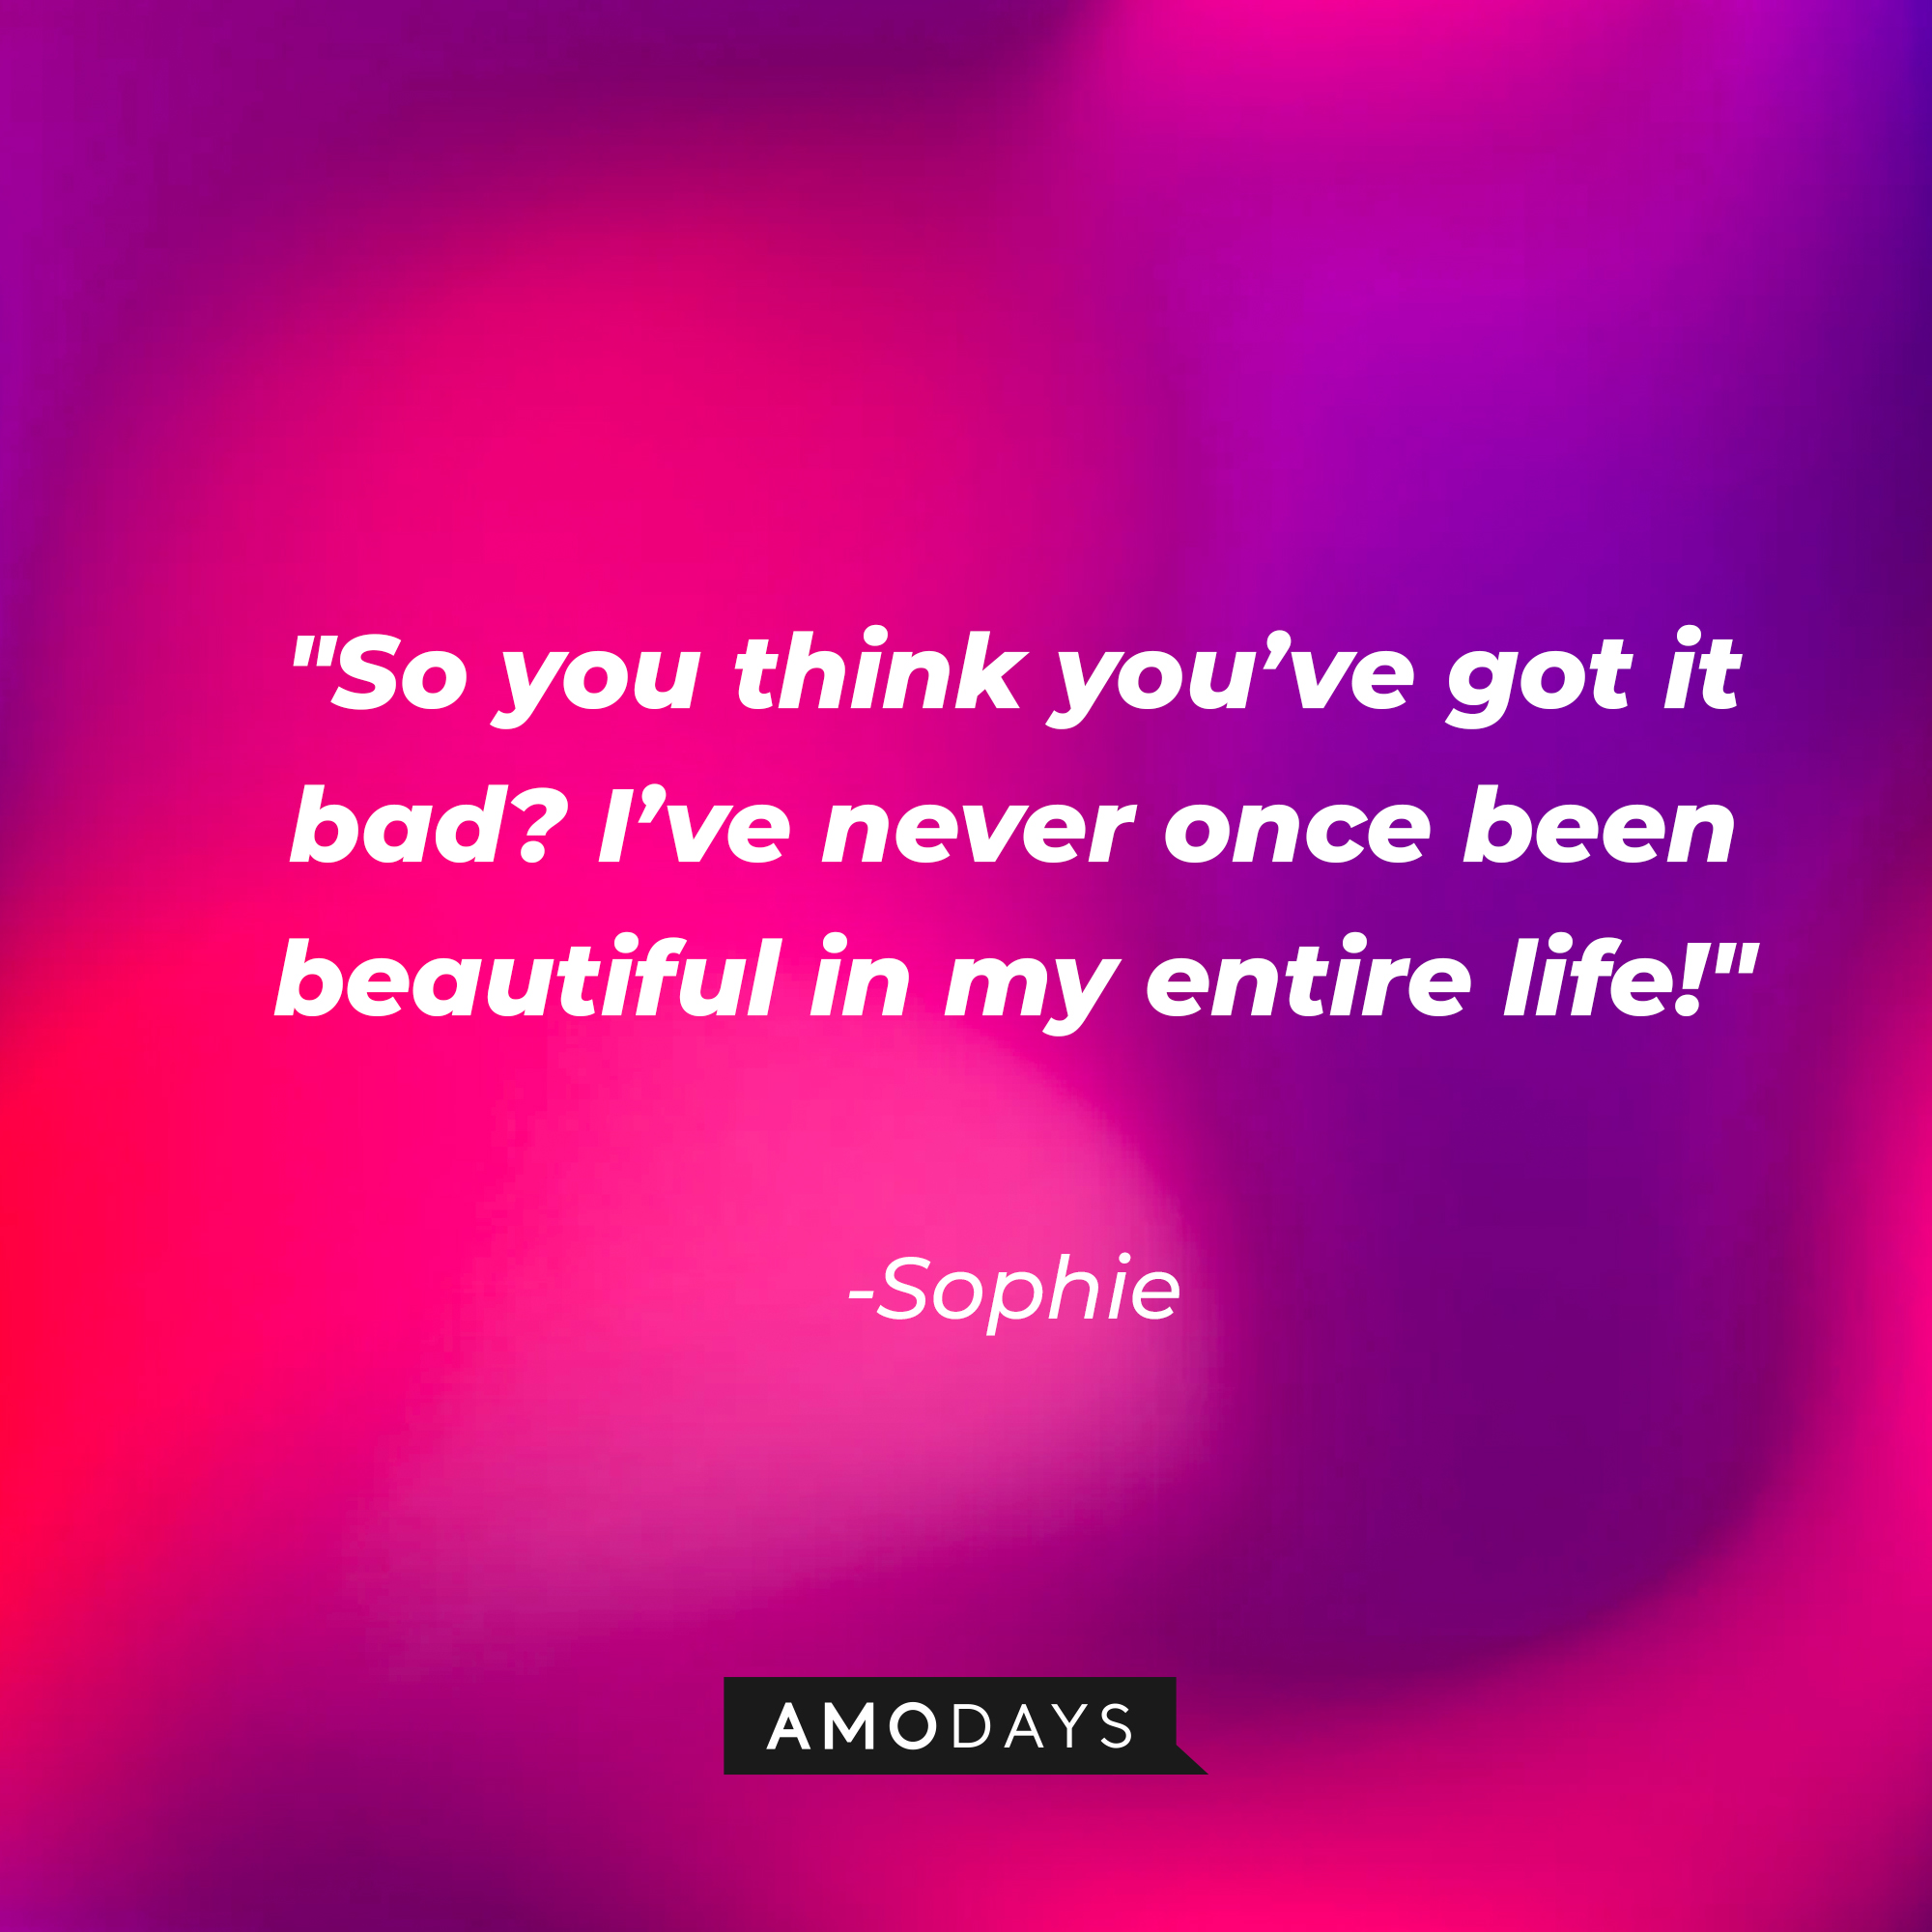 Sophie's quote: "So you think you've got it bad? I've never once been beautiful in my entire life!" | Source: Amodays